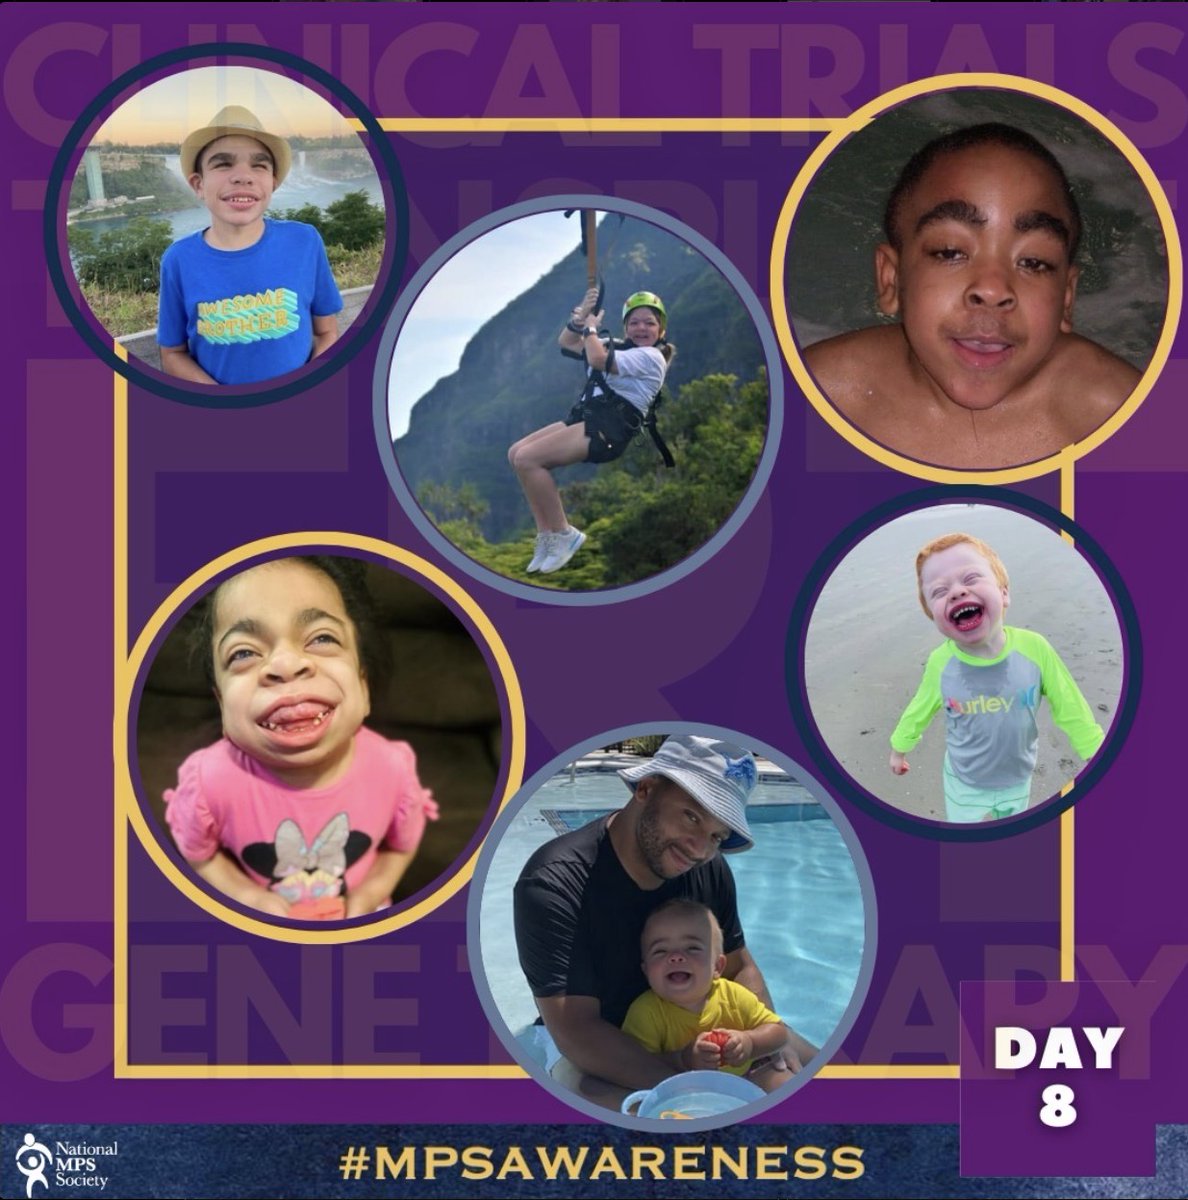 #MPSAwareness: Day 8 -- Do MPS/ML have cures? No. But we have treatments! ERT is approved for MPS I, II IVA, VI & VII. For some, bone marrow or stem cells transplants can be an option. Gene editing & gene therapy clinical trials show promise. Our smiles show hope for cures!